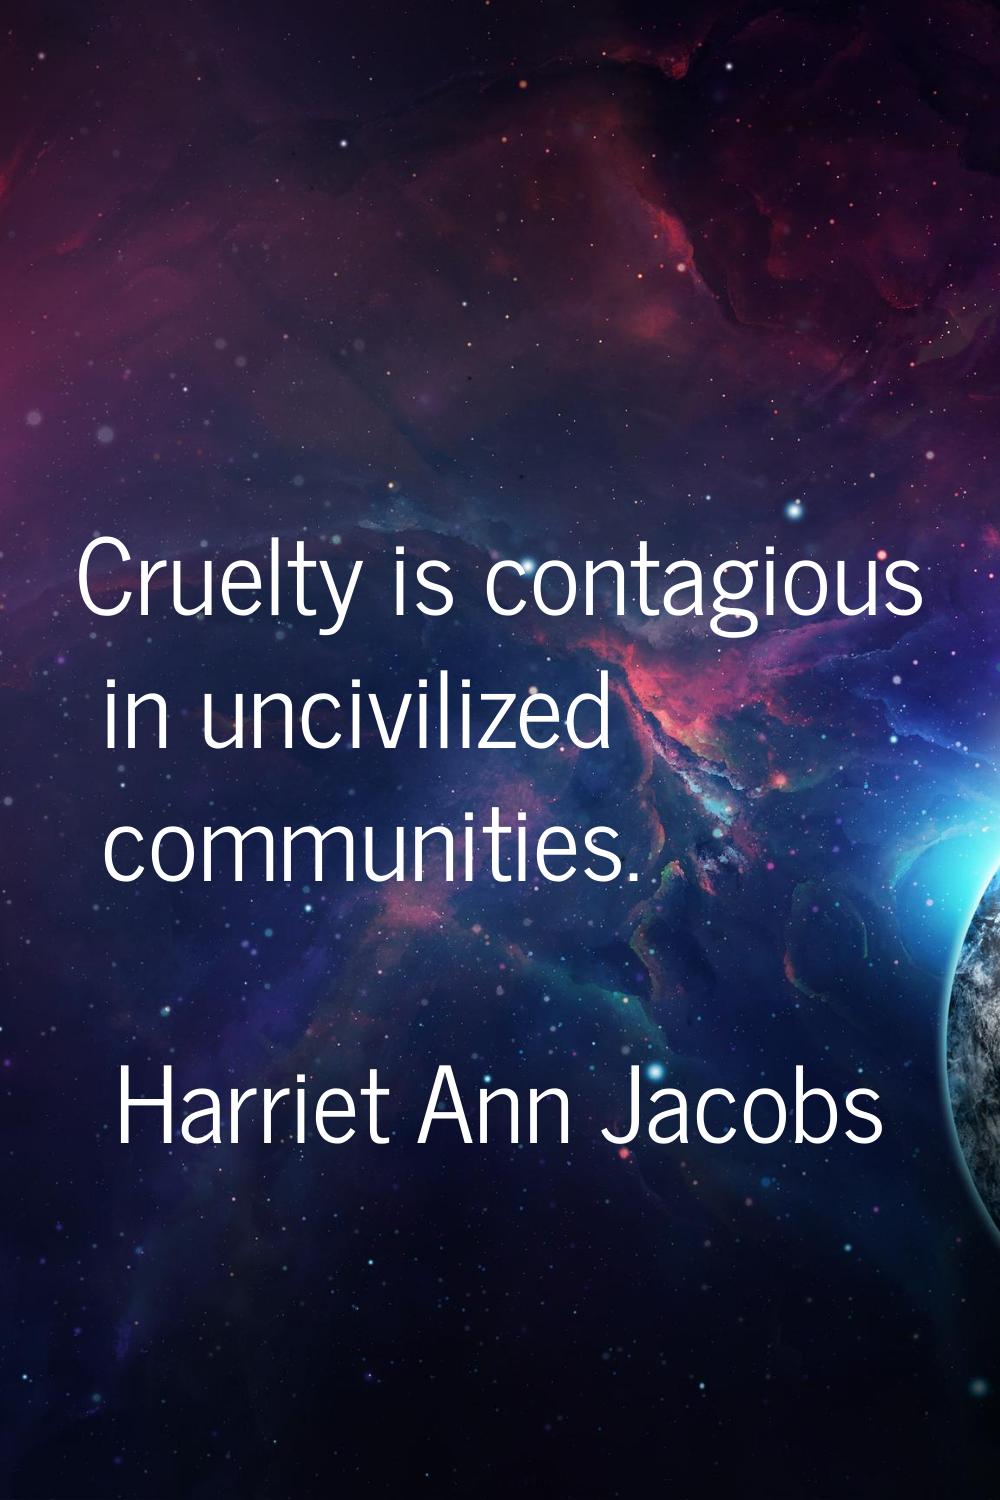 Cruelty is contagious in uncivilized communities.